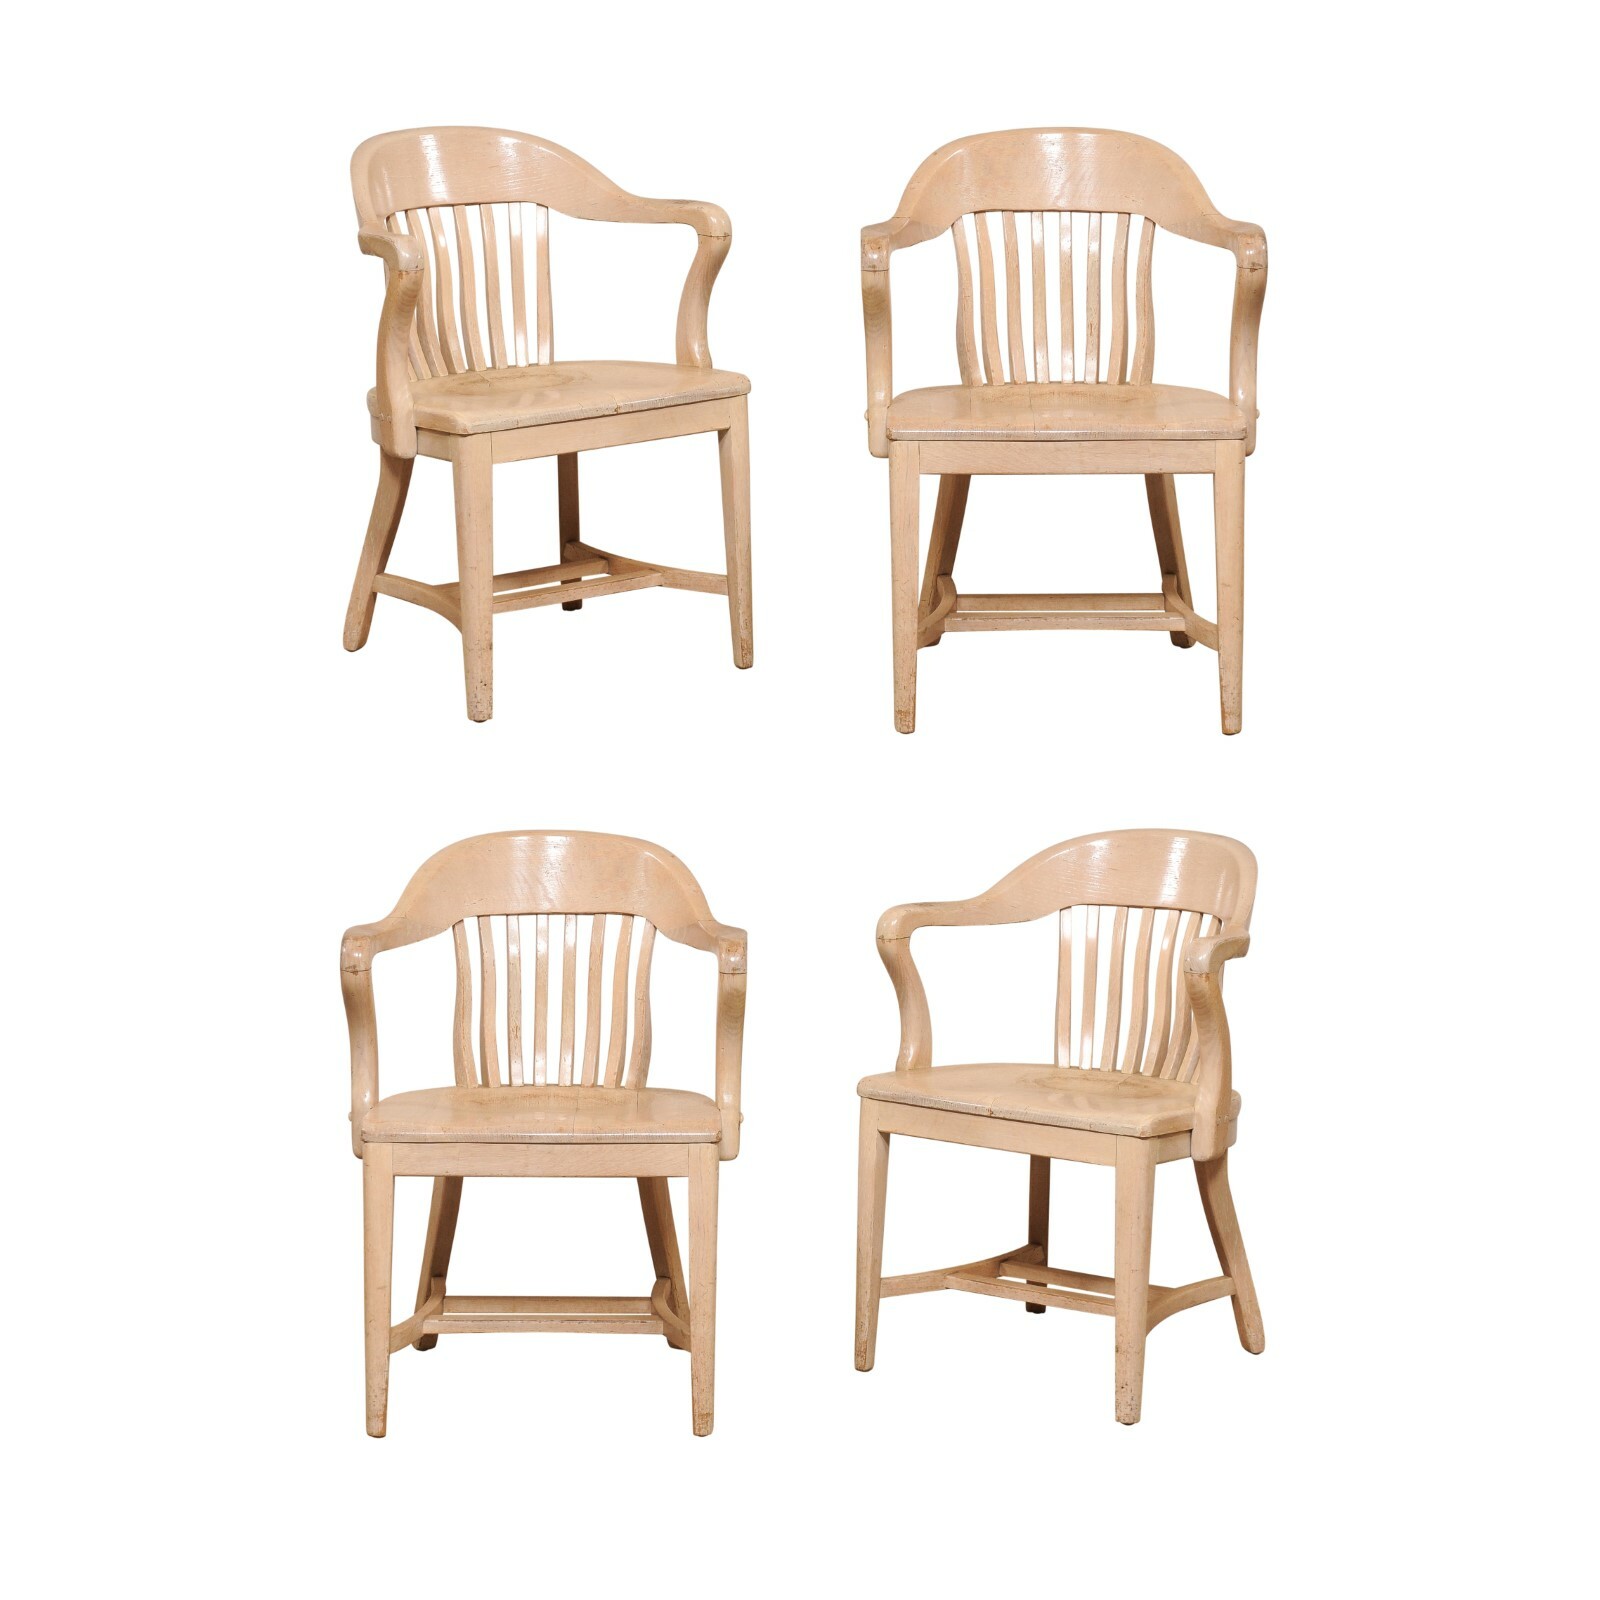 Set of 4 English Wooden Library Armchairs